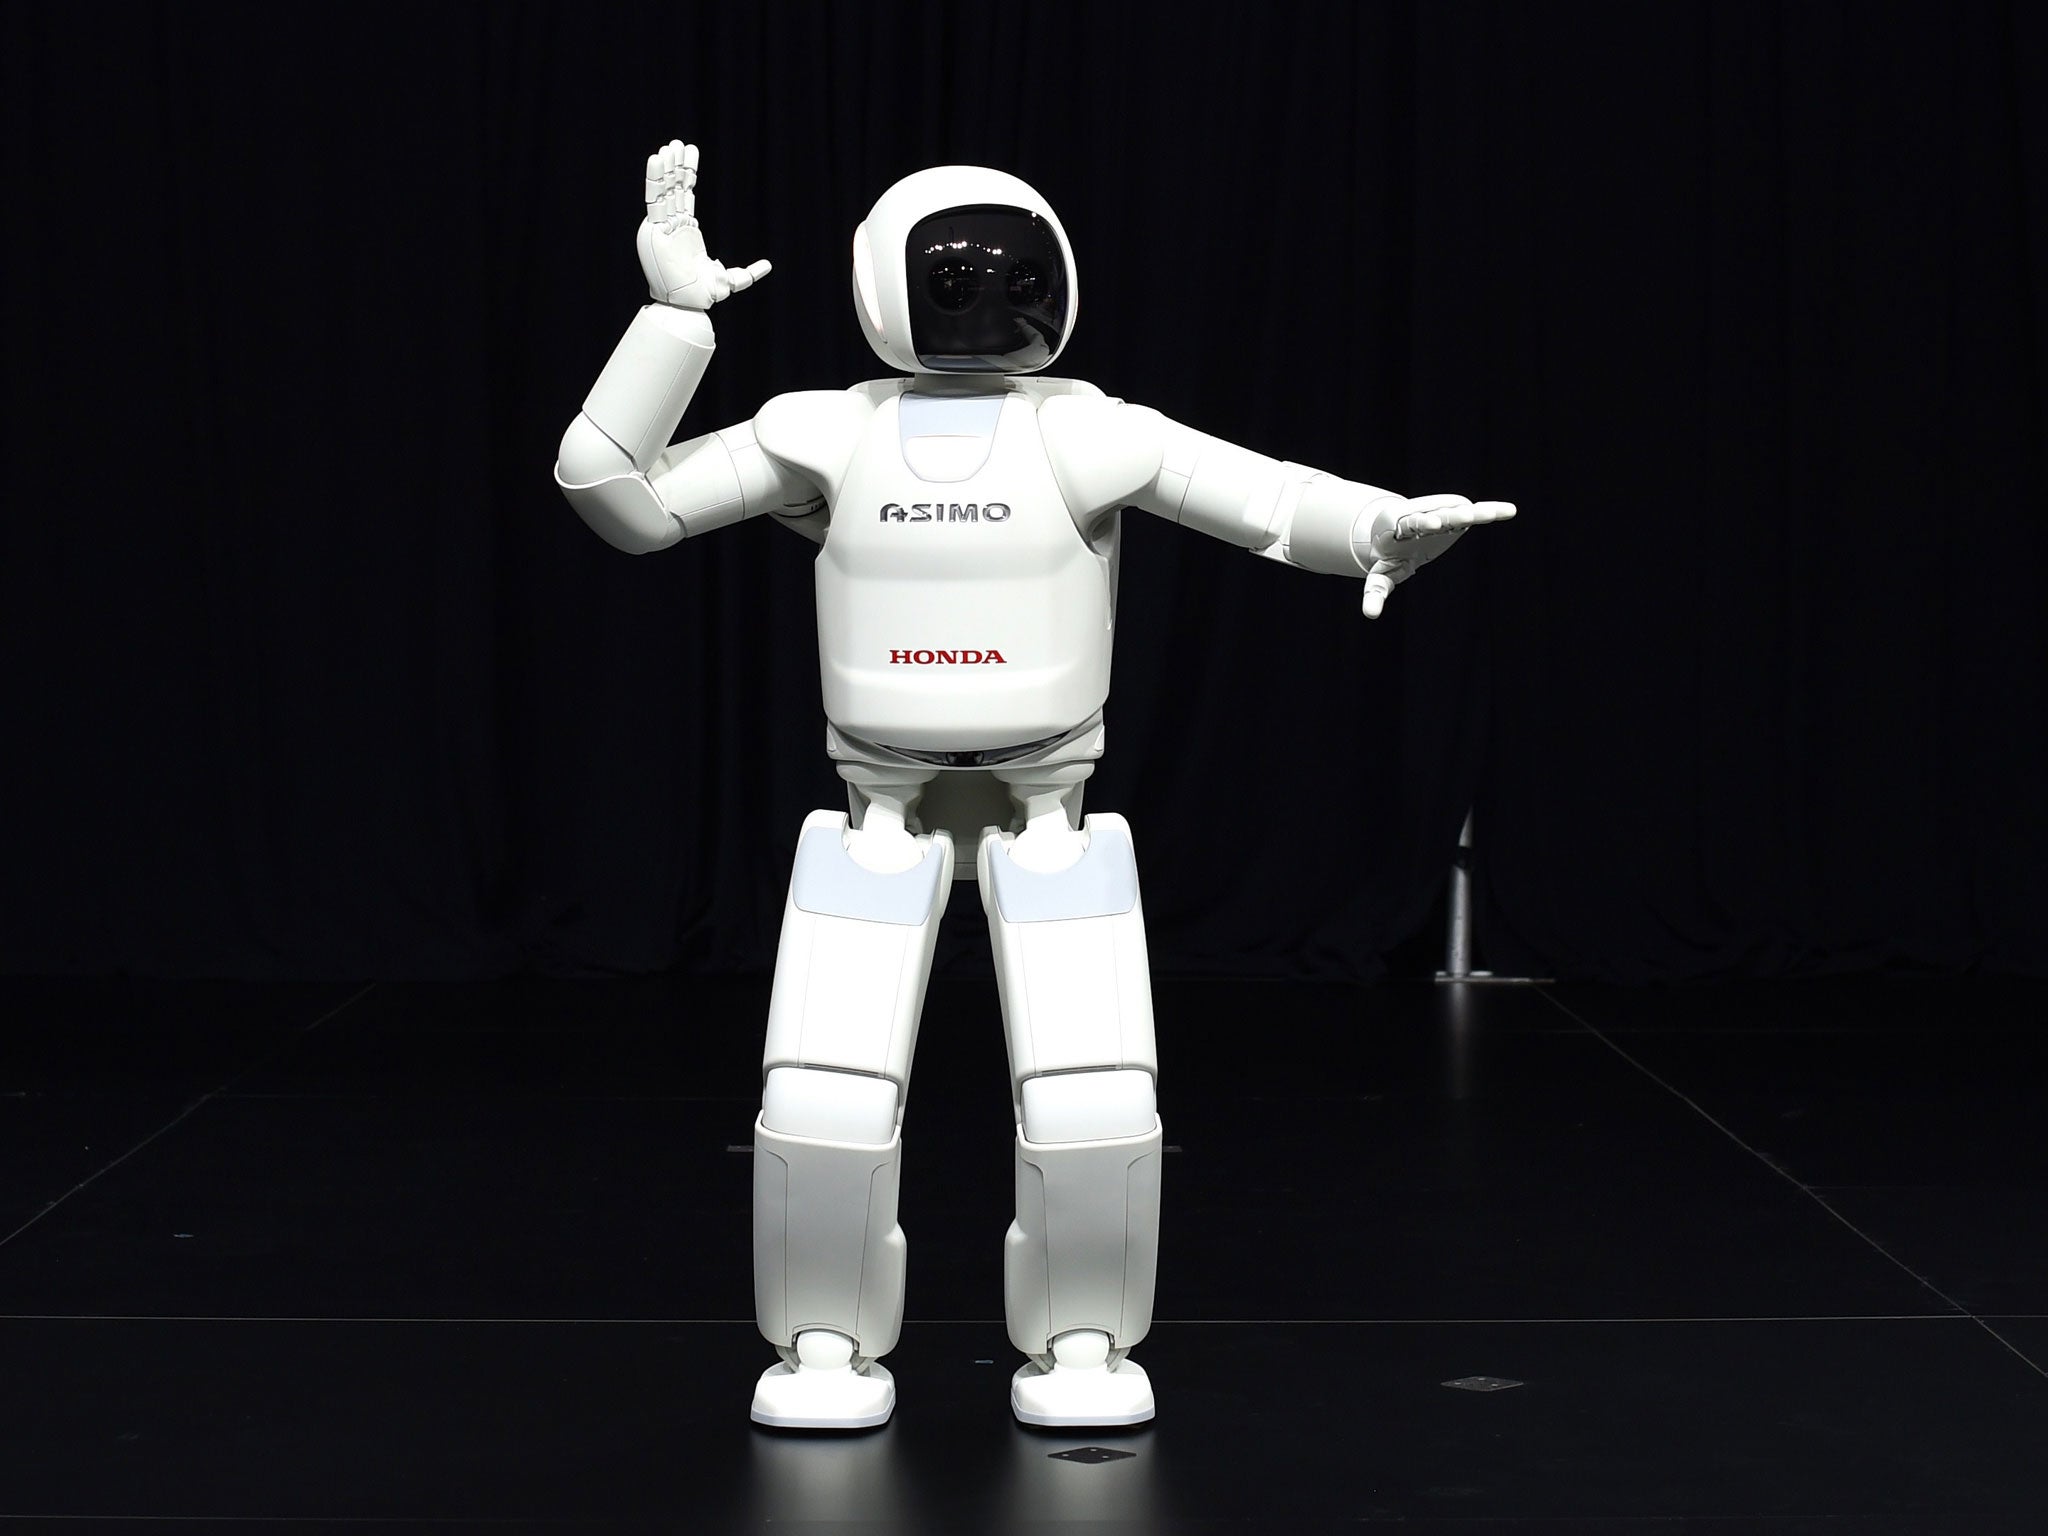 Honda's Asimo is just one example of robots adhering to the sci-fi dream